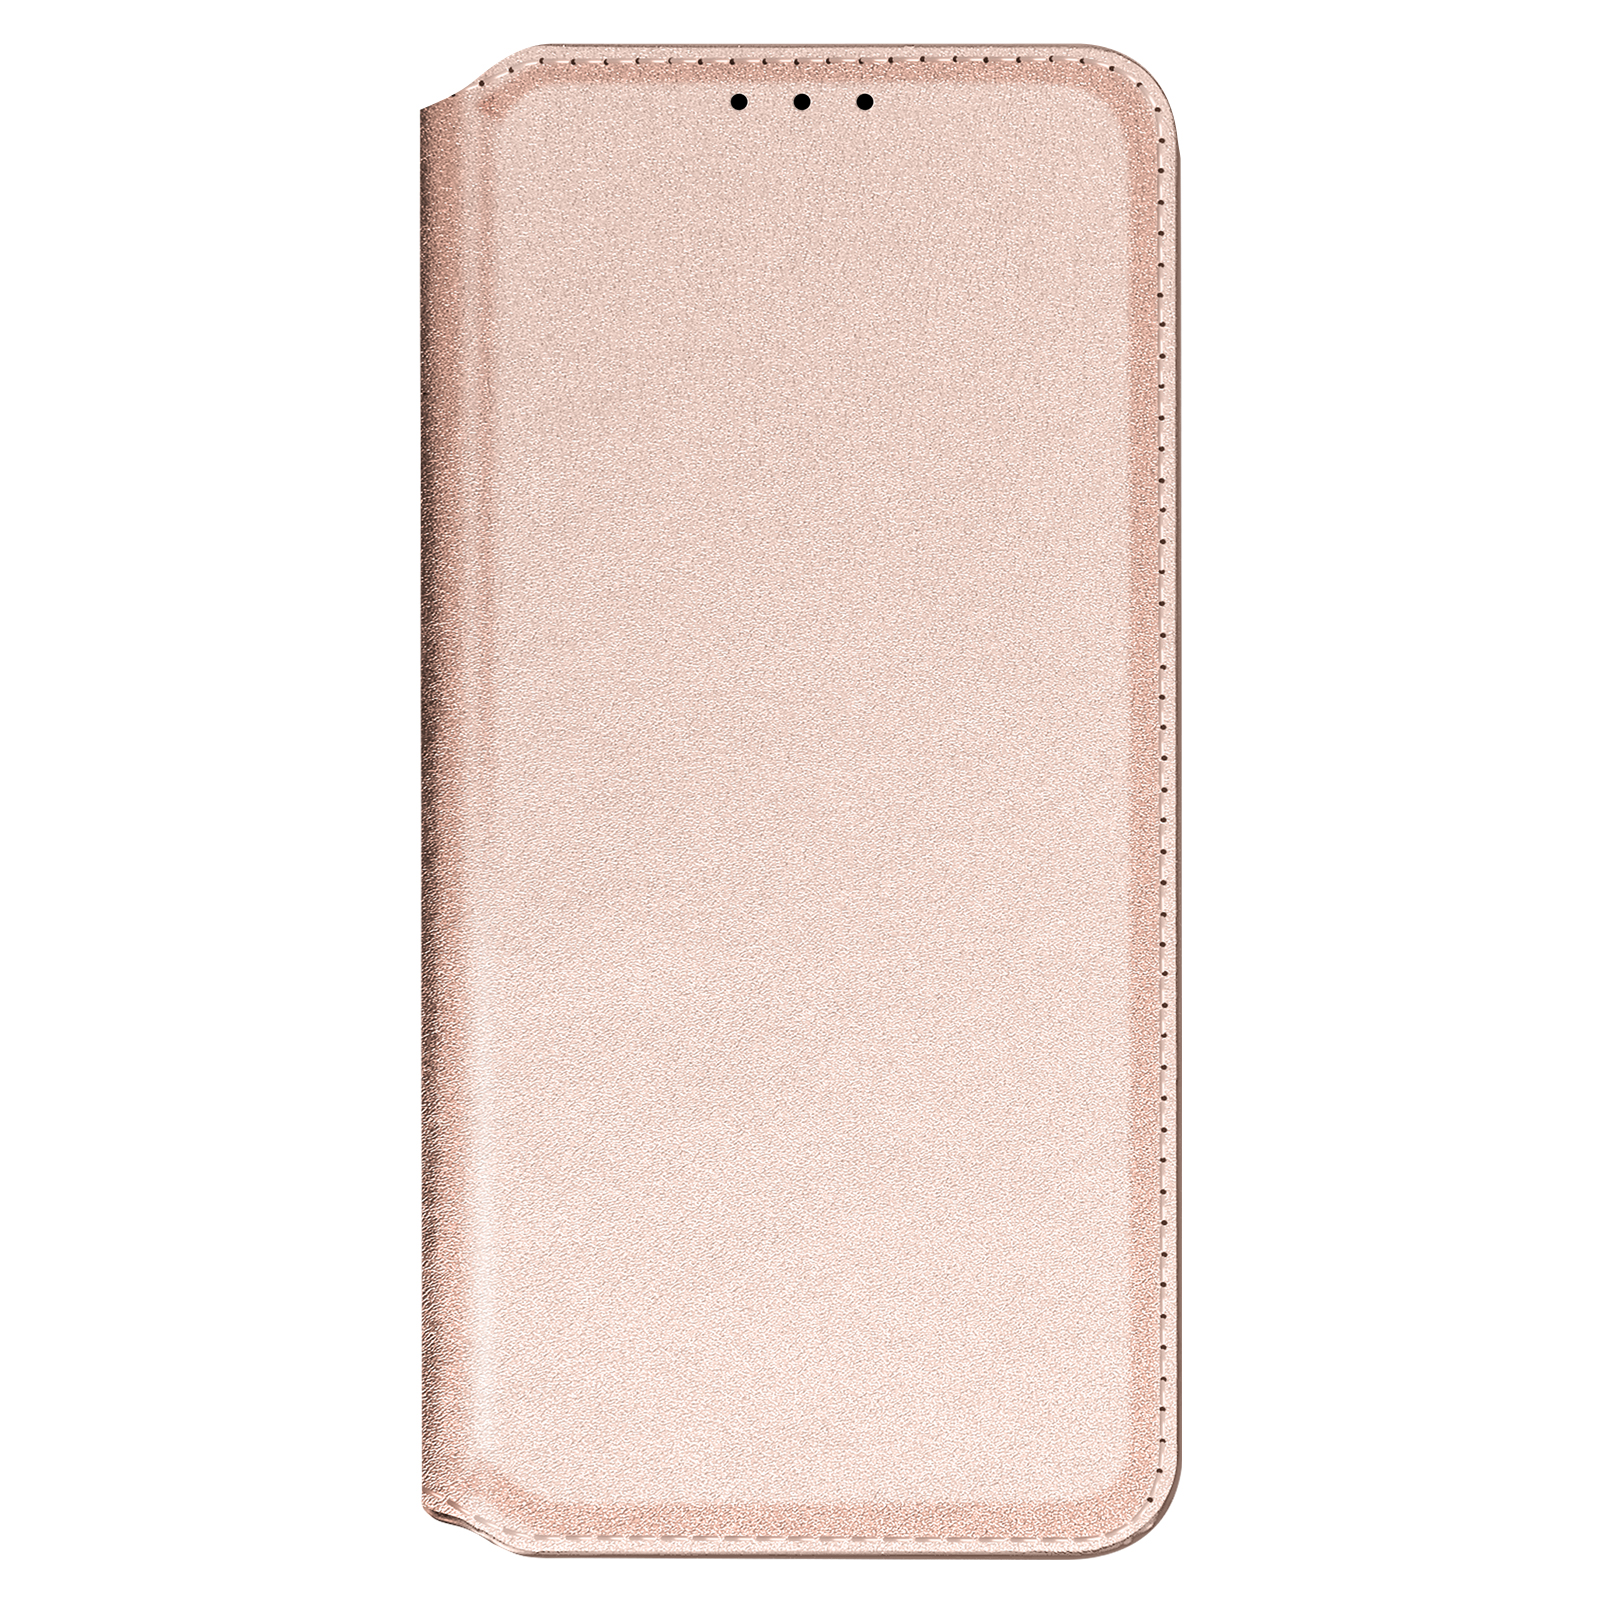 mit Backcover AVIZAR S21 Rosegold Edition, Series, Magnetklappe Samsung, Galaxy Bookcover, FE, Classic